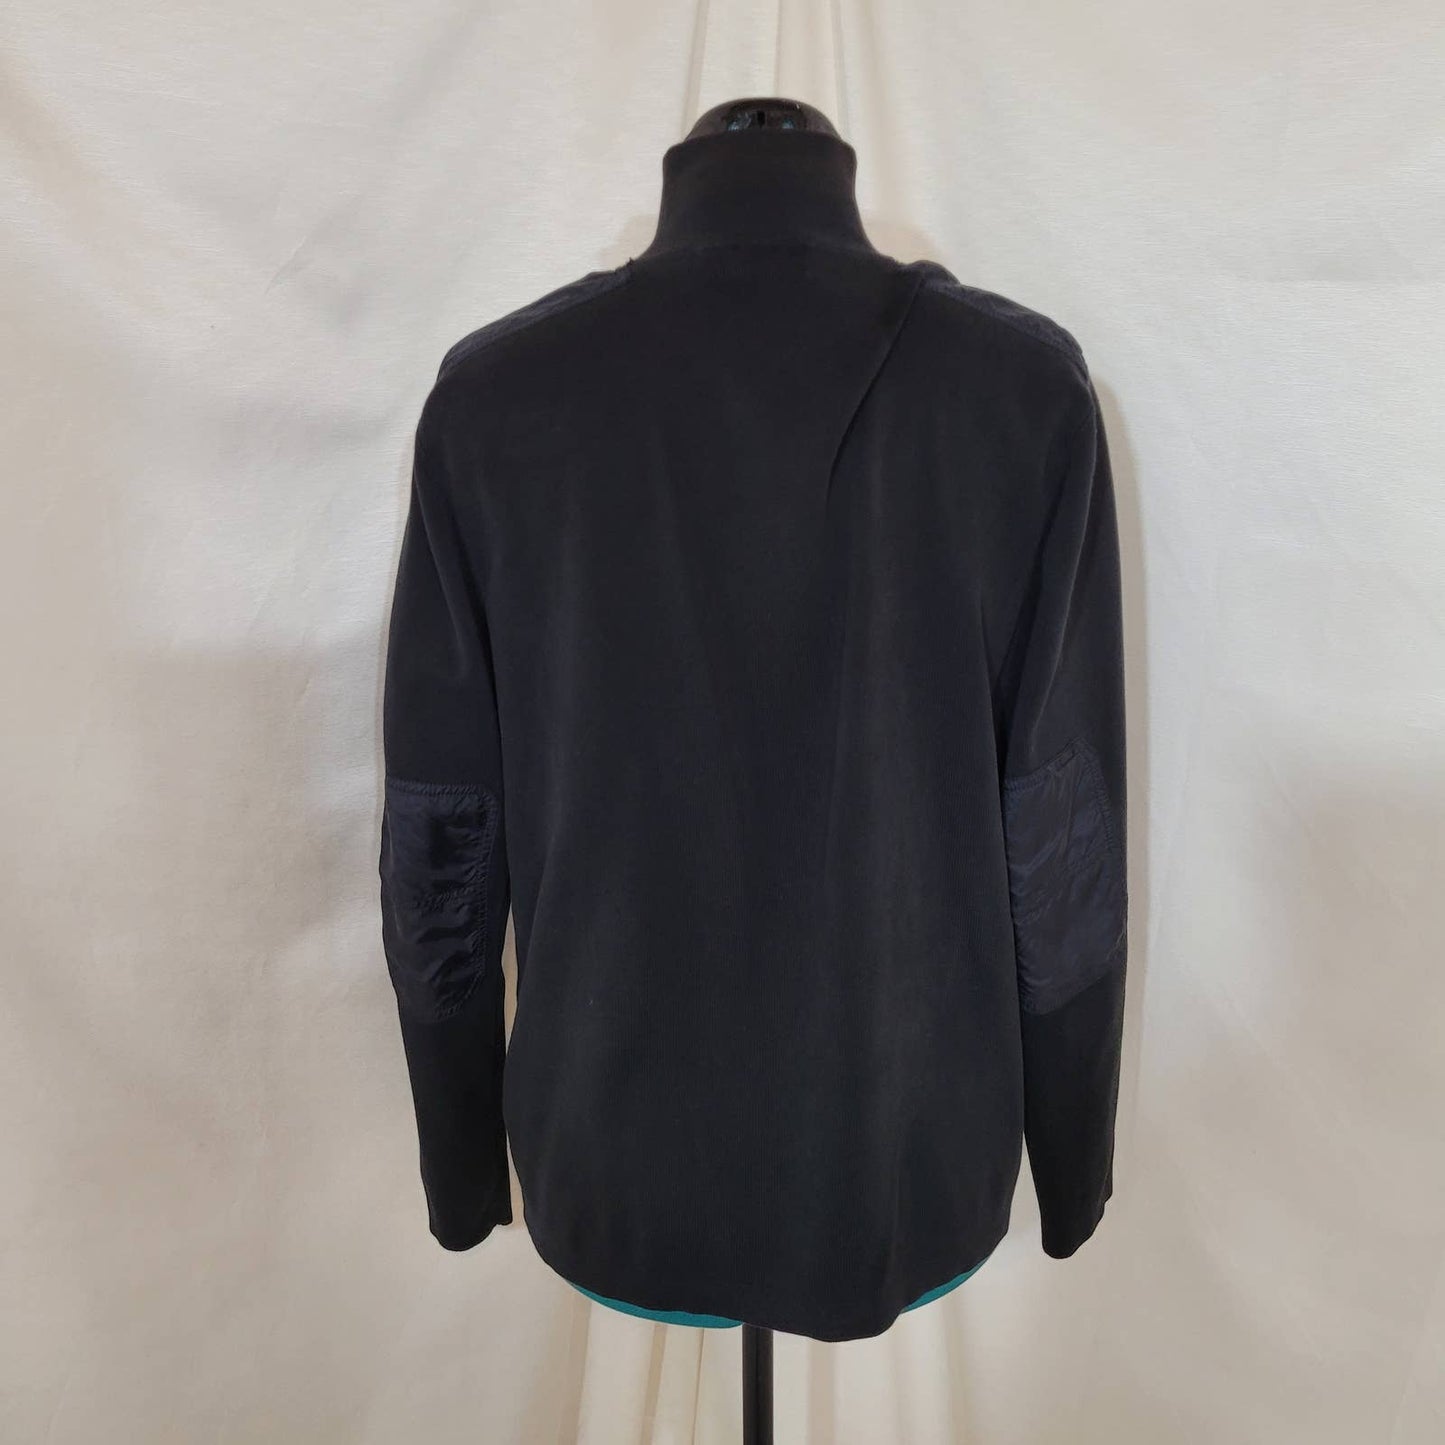 Mexx Black Zip Up Sweater with Shoulder and Elbow Patches - Size MediumMarkita's ClosetMexx